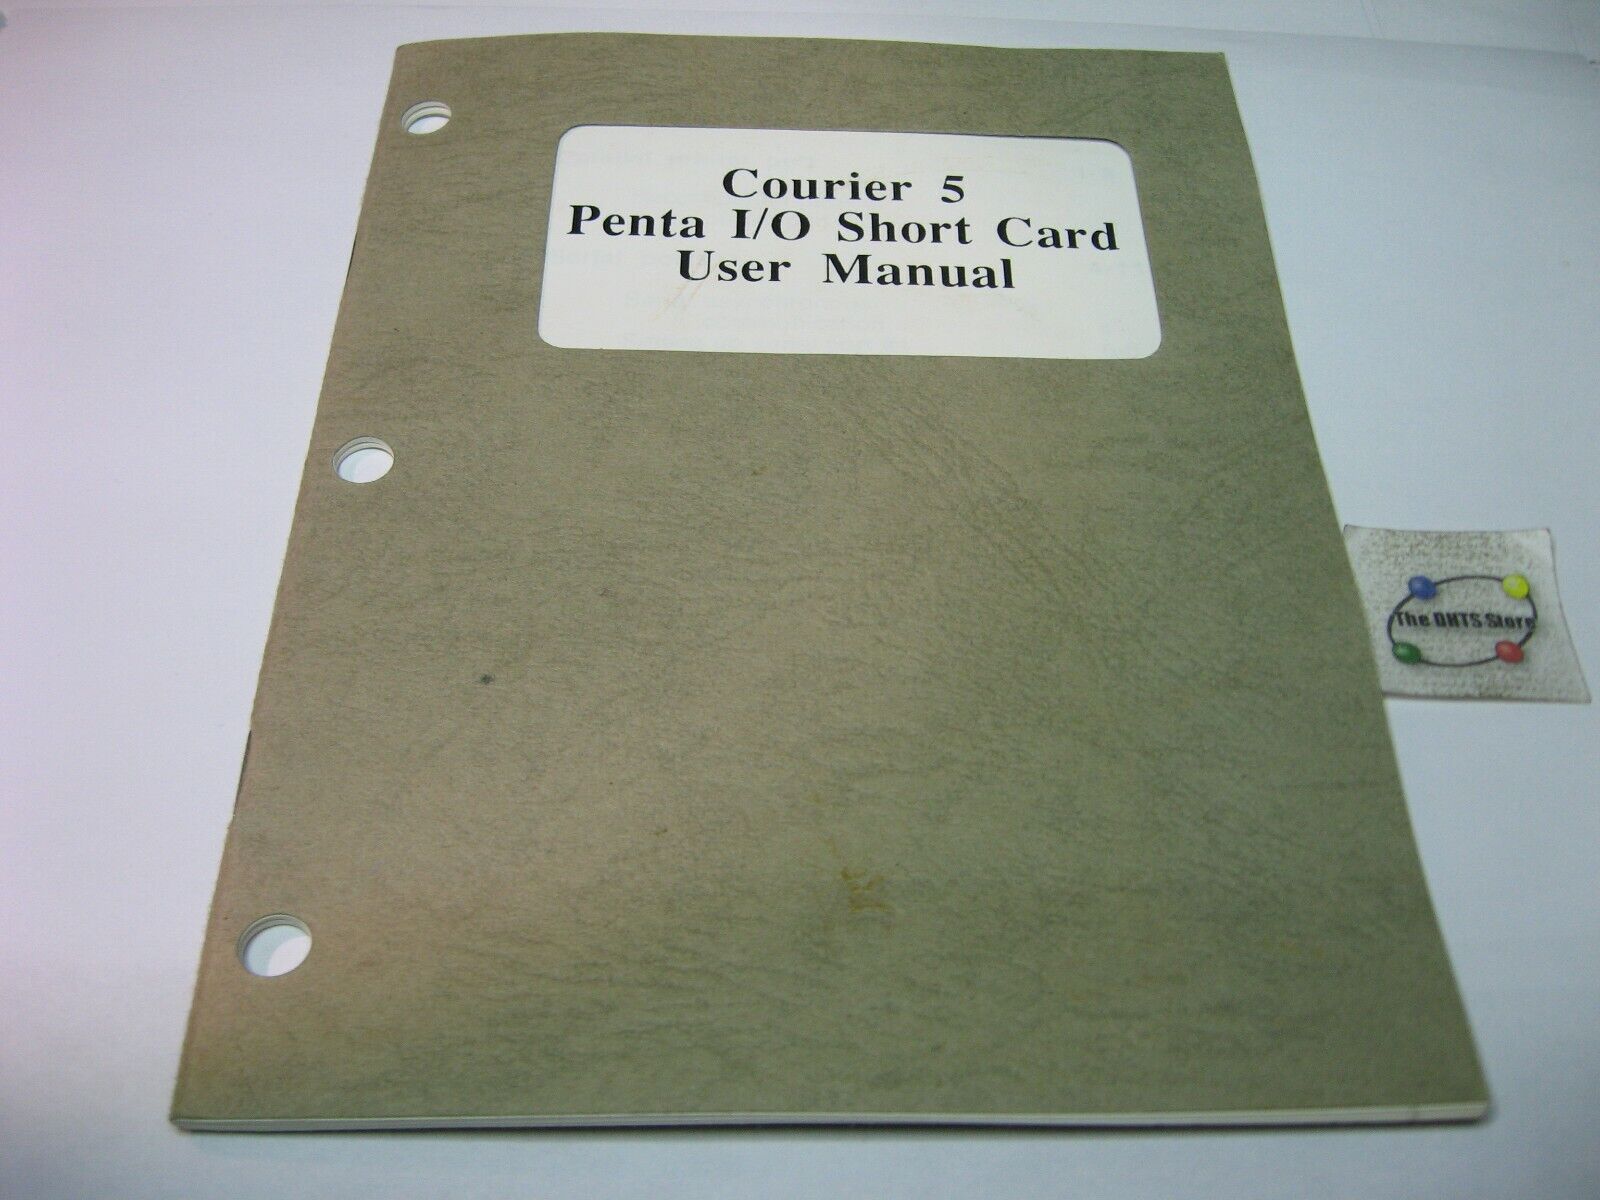 User Manual Datatech Courier-5 Penta I/O Short Card Original 15 Pages - Used